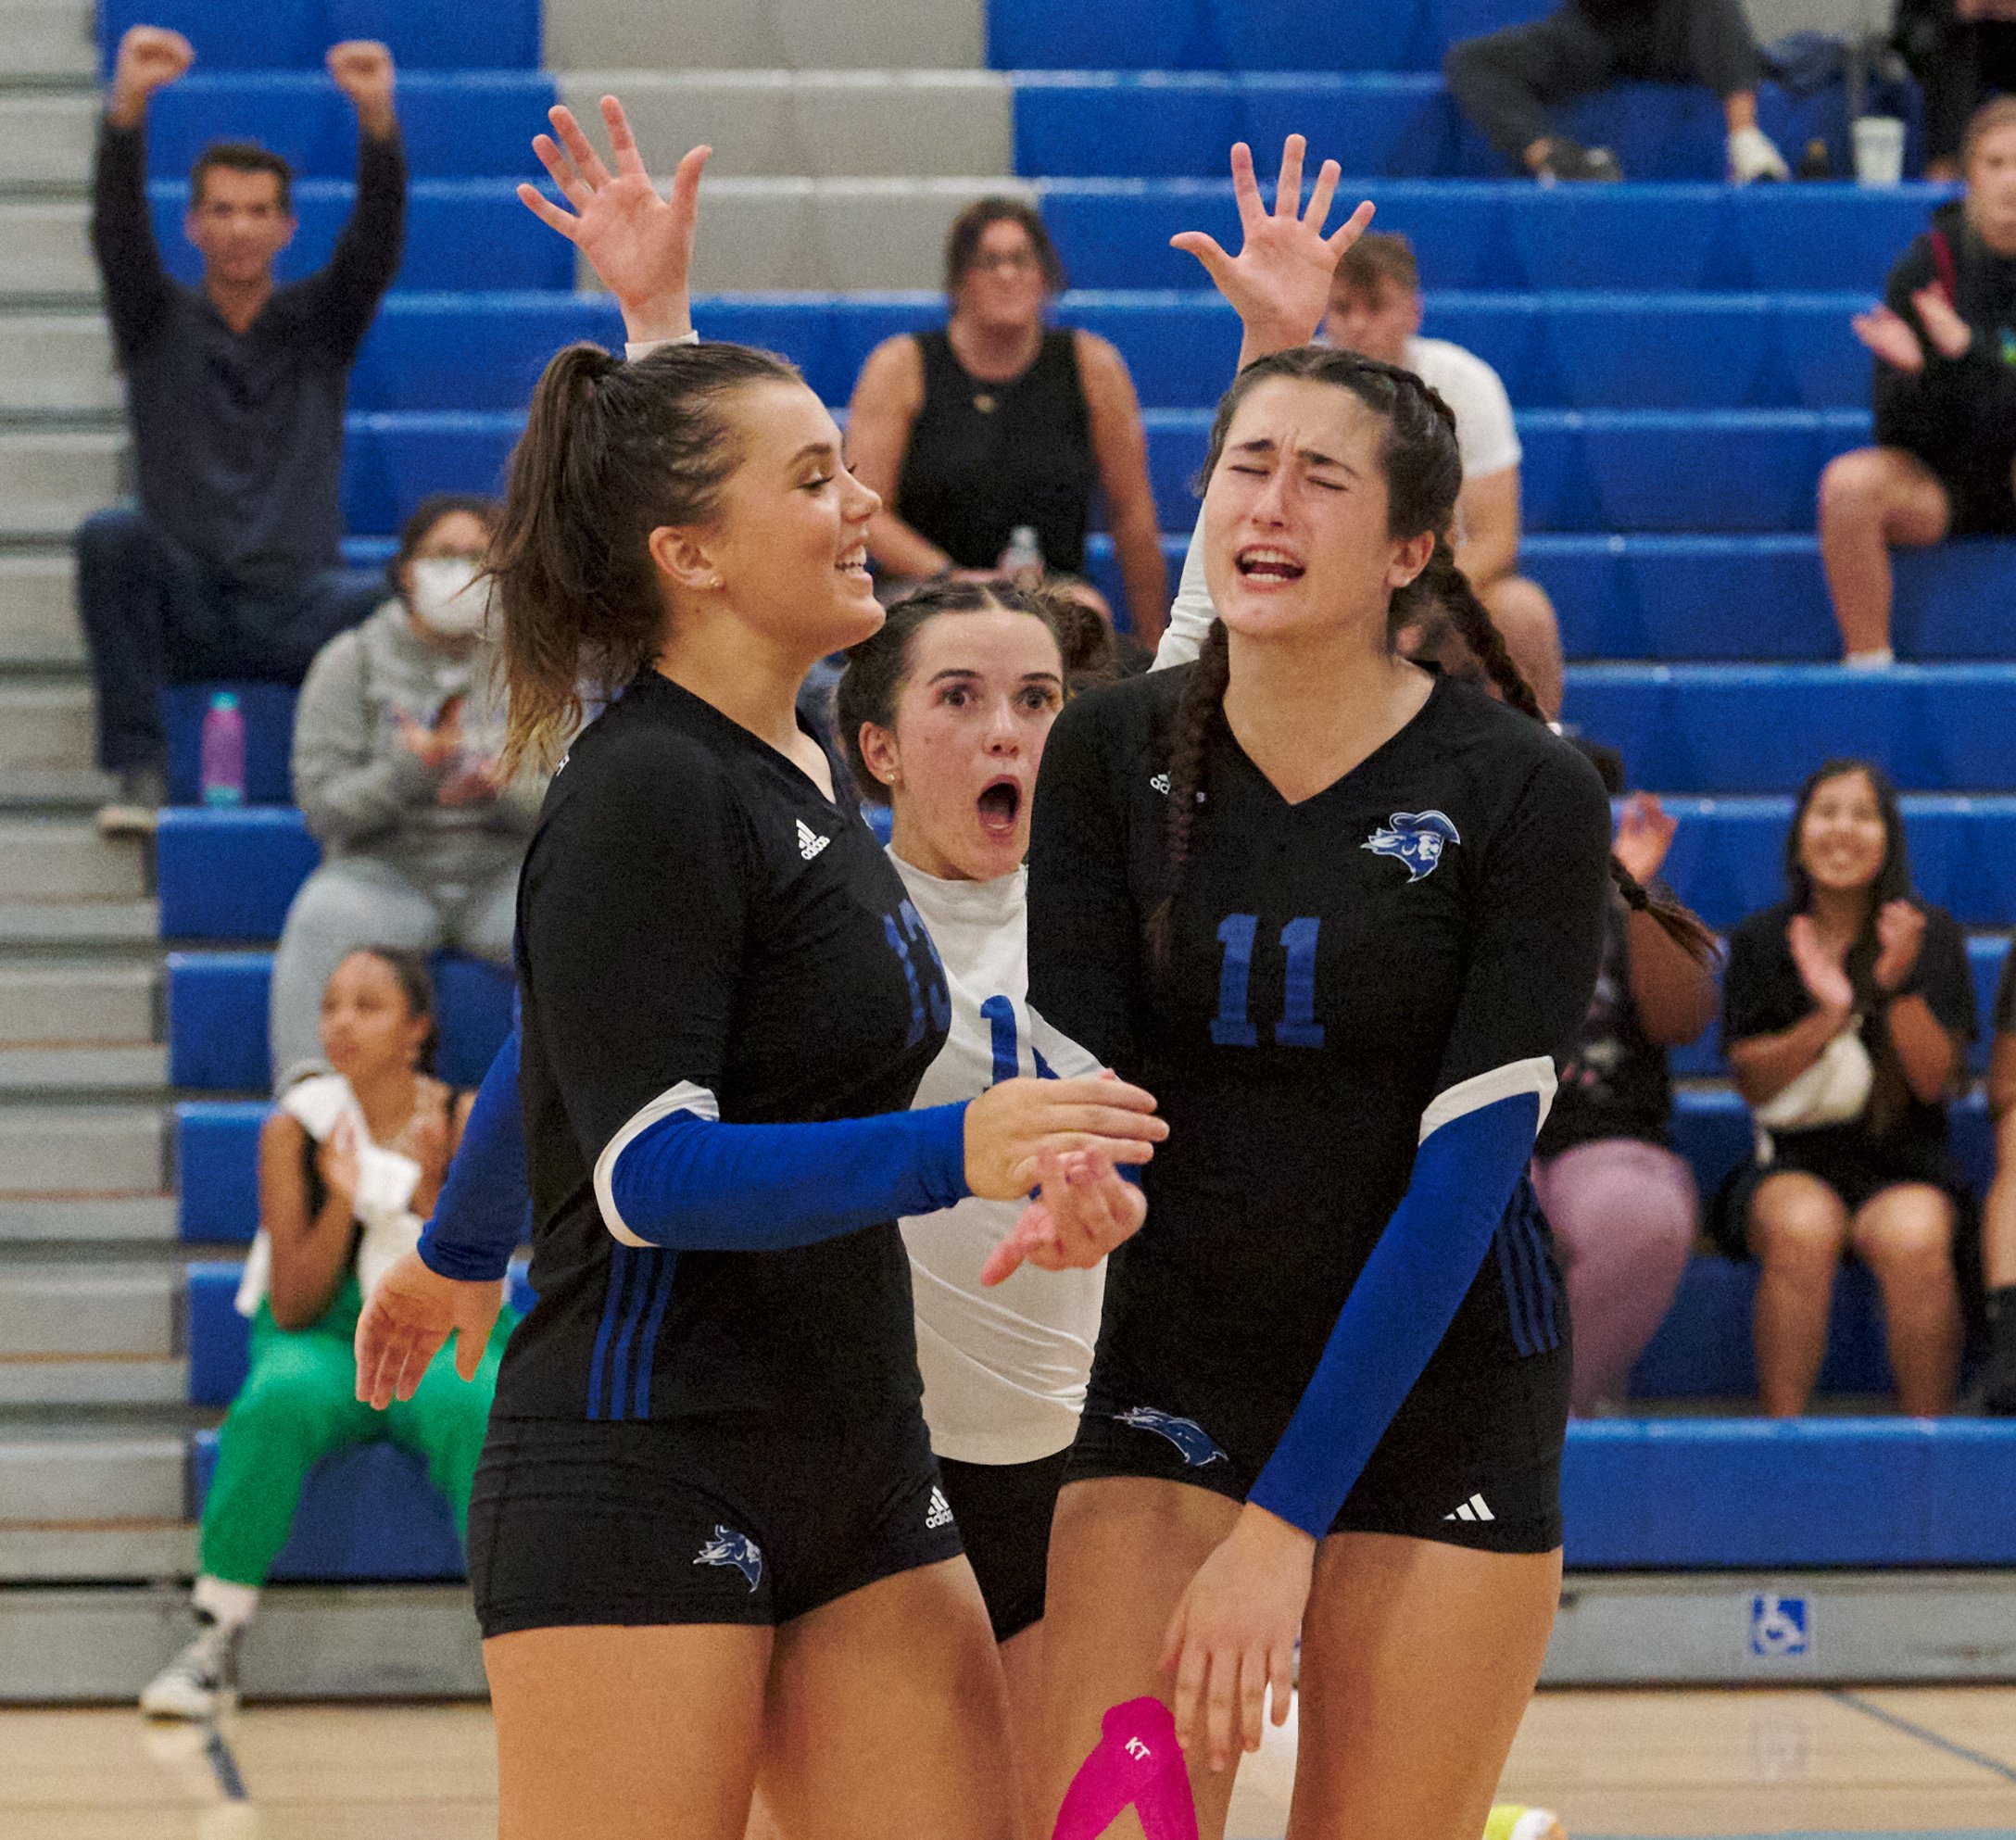  Santa Monica College Corsairs' Mackenzie Wolff, Halle Anderson (rear), and Maiella Riva after scoring a point during the women's volleyball match against the Moorpark College Raiders on Friday, Sept. 23, 2022, at the Corsair Gym in Santa Monica, Cal